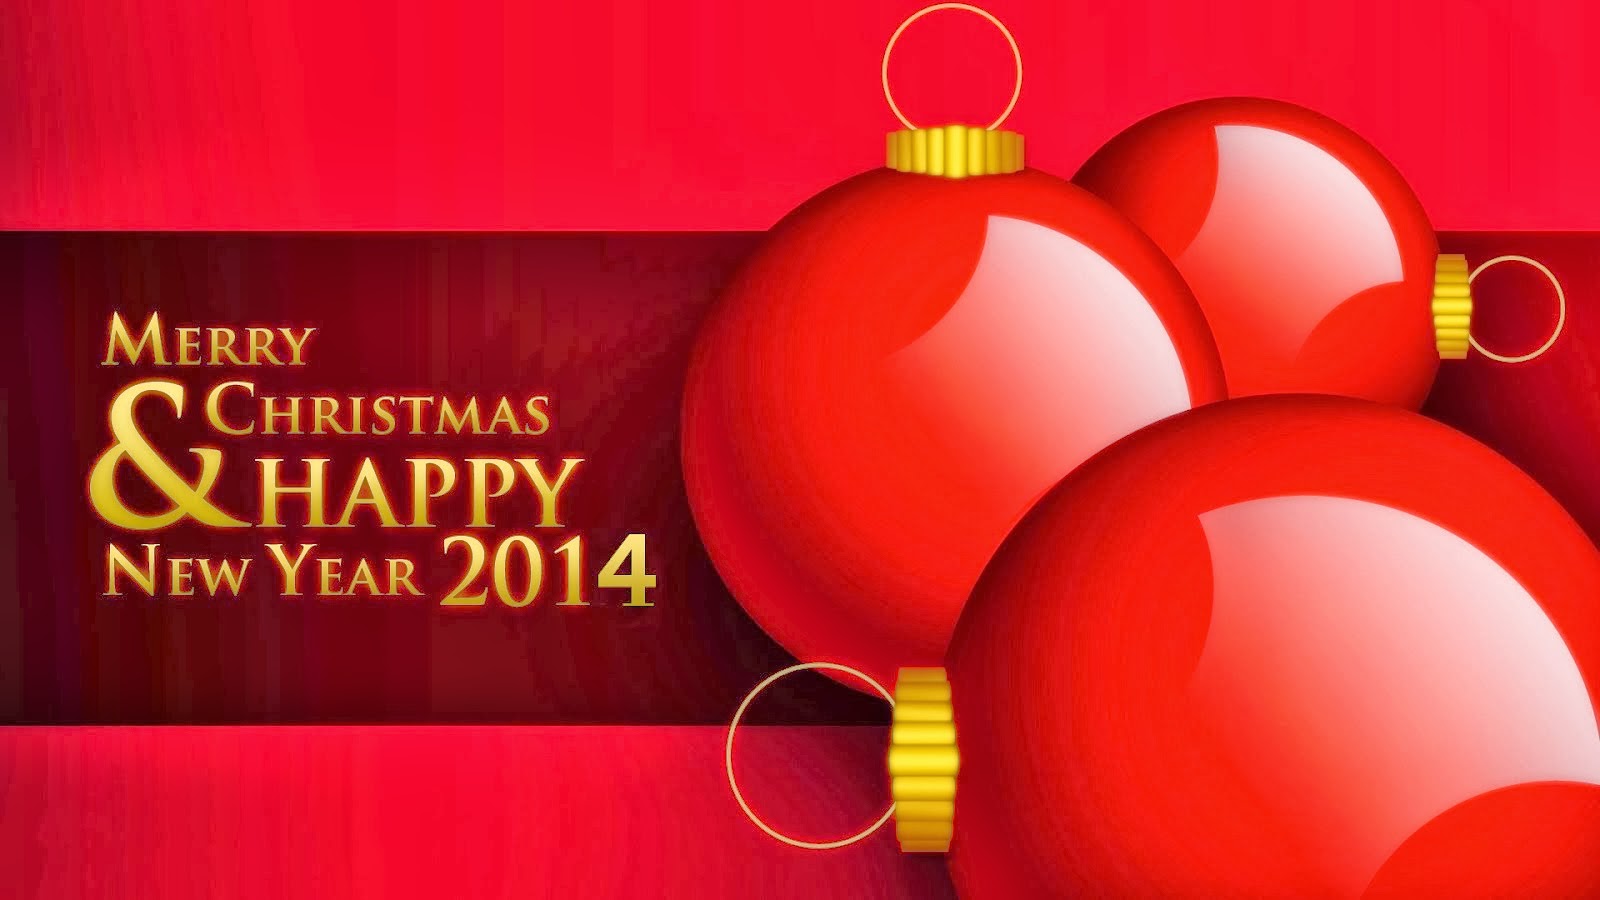 Merry Christmas 2013 And Happy New Year 2014